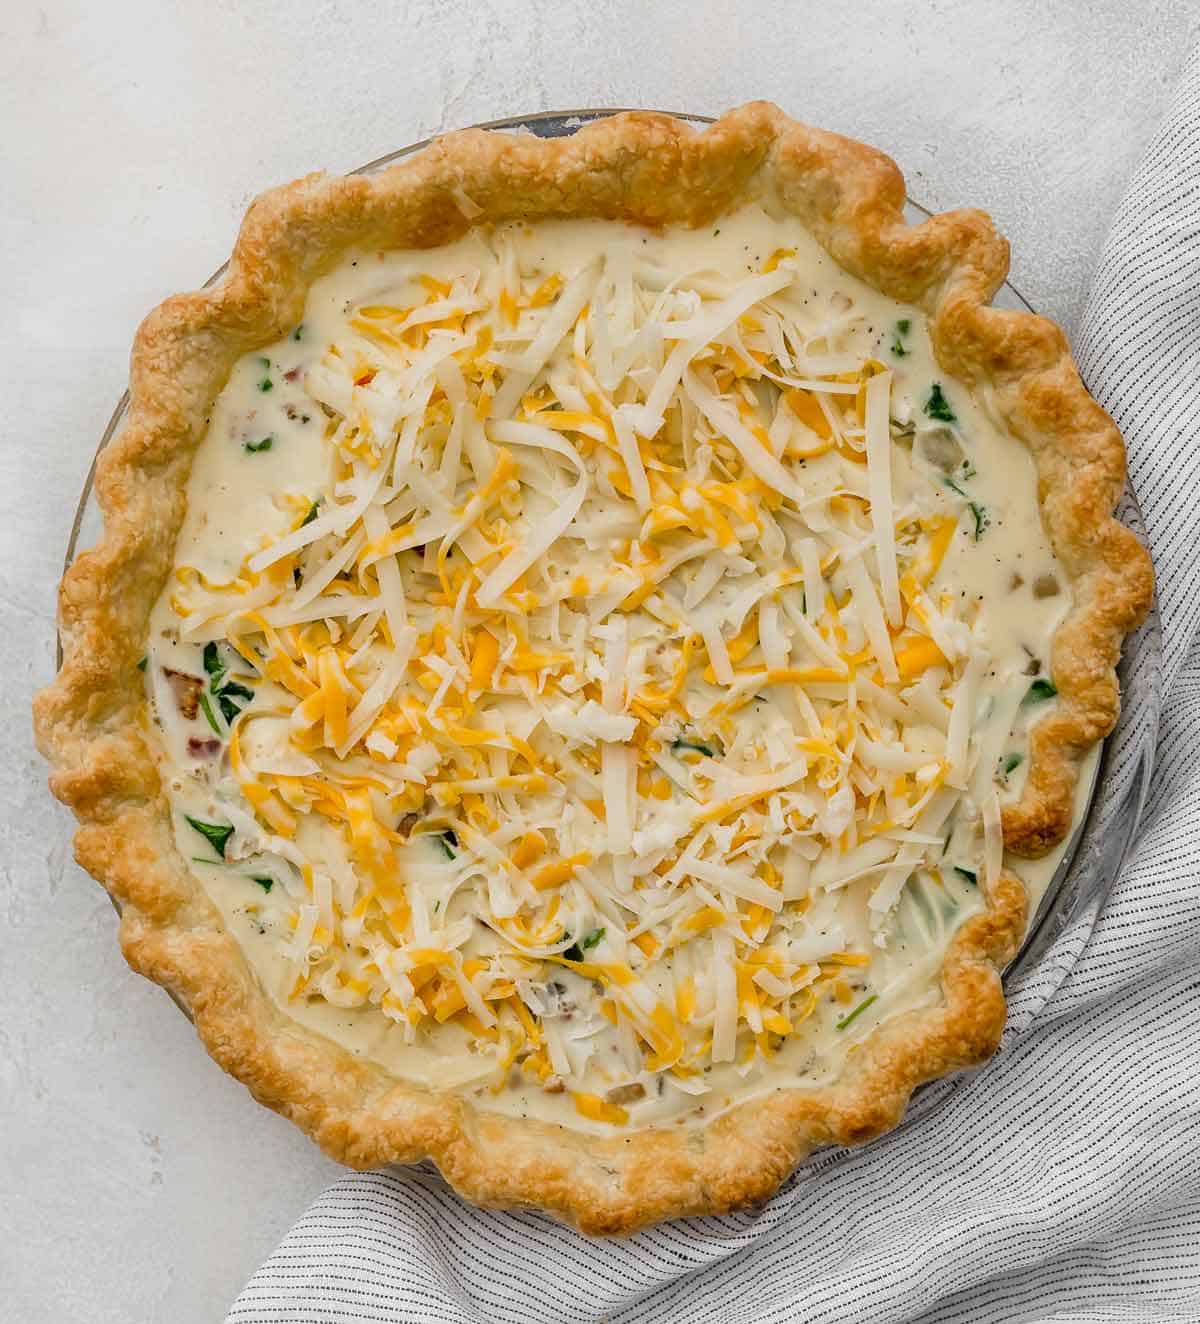 An unbaked Spinach and Bacon Quiche in a homemade pie crust.